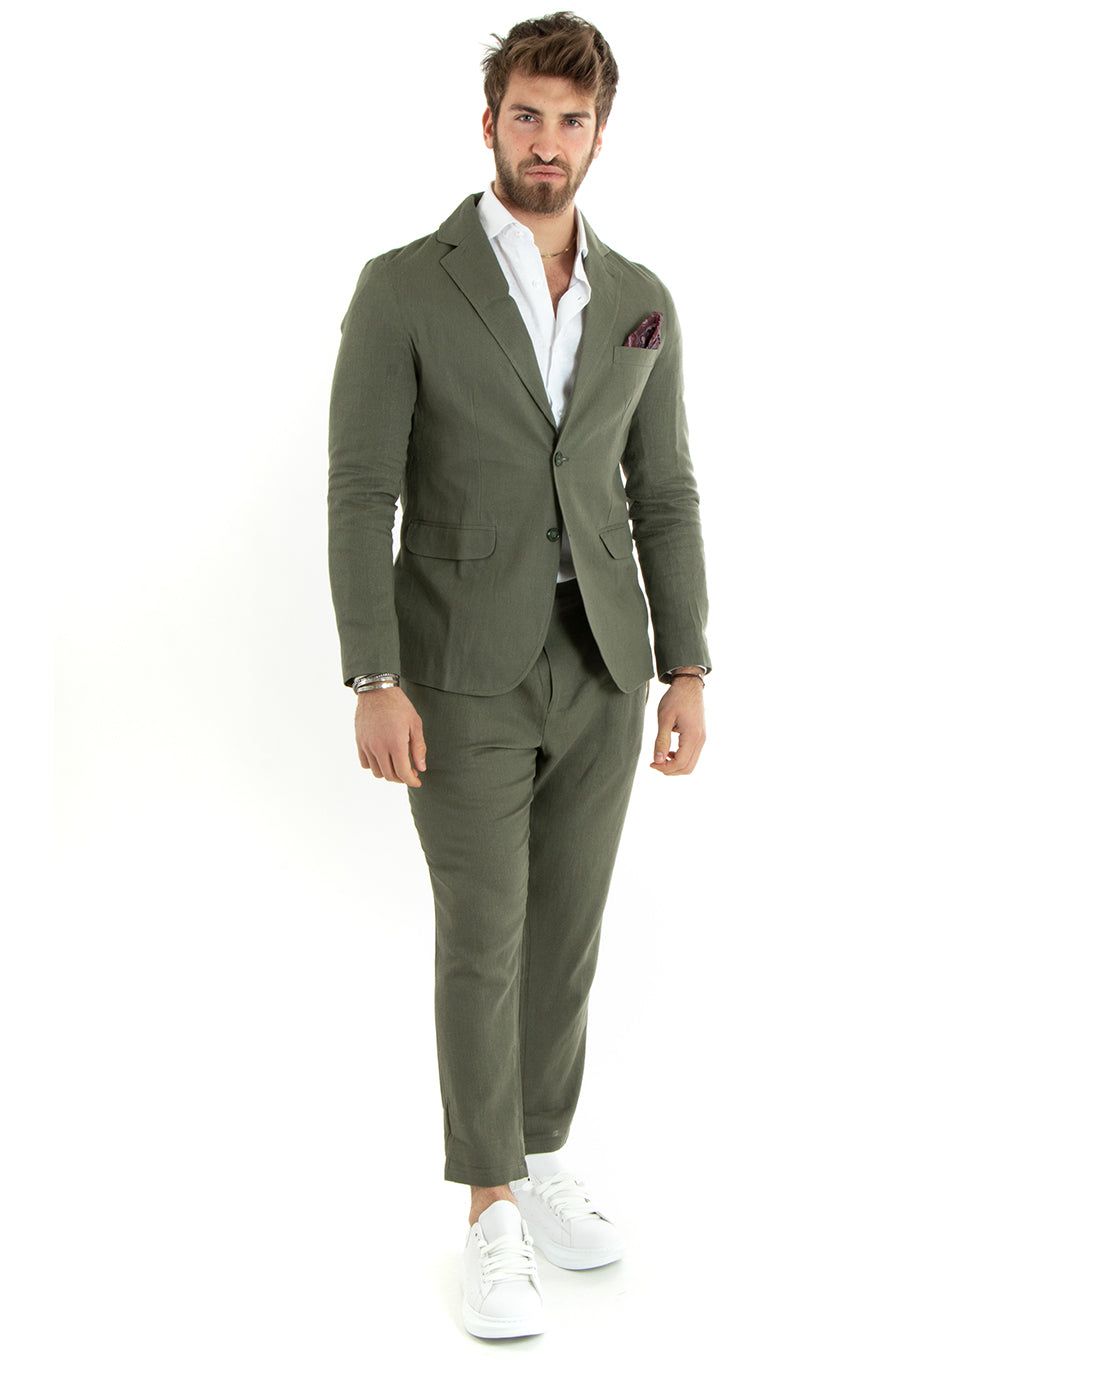 Single-breasted men's suit, tailored linen suit, jacket, trousers, solid color, green GIOSAL-OU2323A